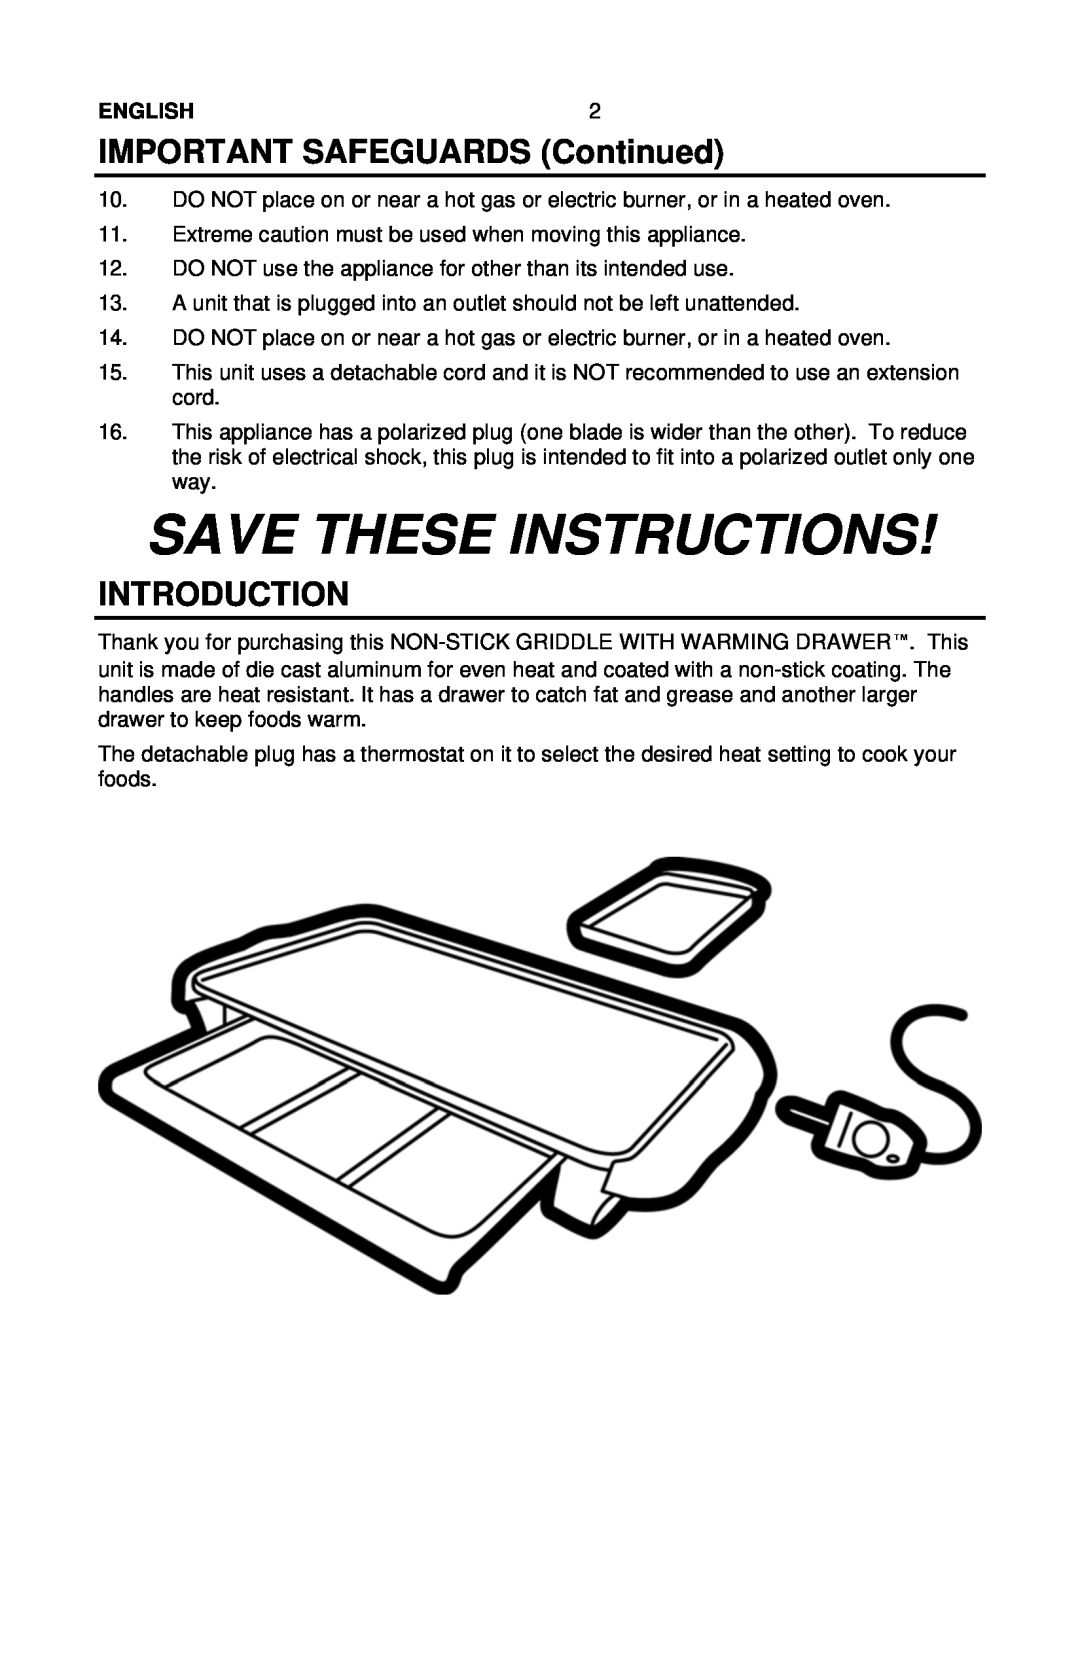 Nostalgia Electrics NGD-200 manual IMPORTANT SAFEGUARDS Continued, Introduction, Save These Instructions, English 